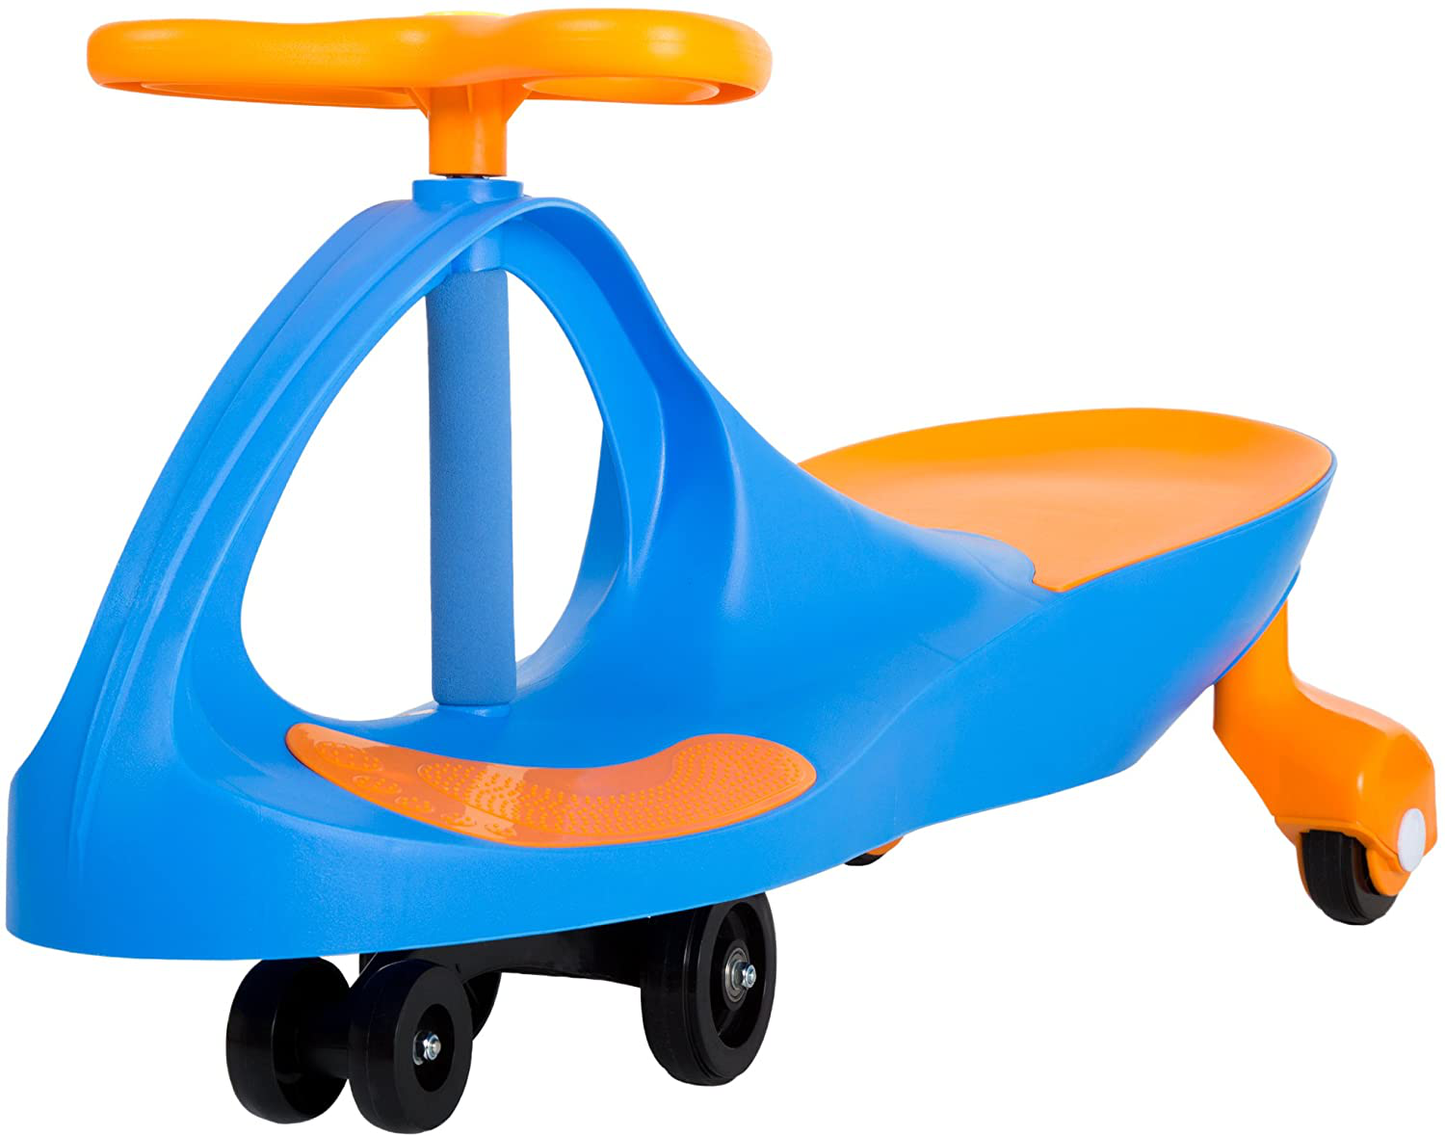 Wiggle Car Ride On Toy – No Batteries, Gears or Pedals – Twist, Swivel, Go – Outdoor Ride Ons for Kids 3 Years and Up by Lil’ Rider